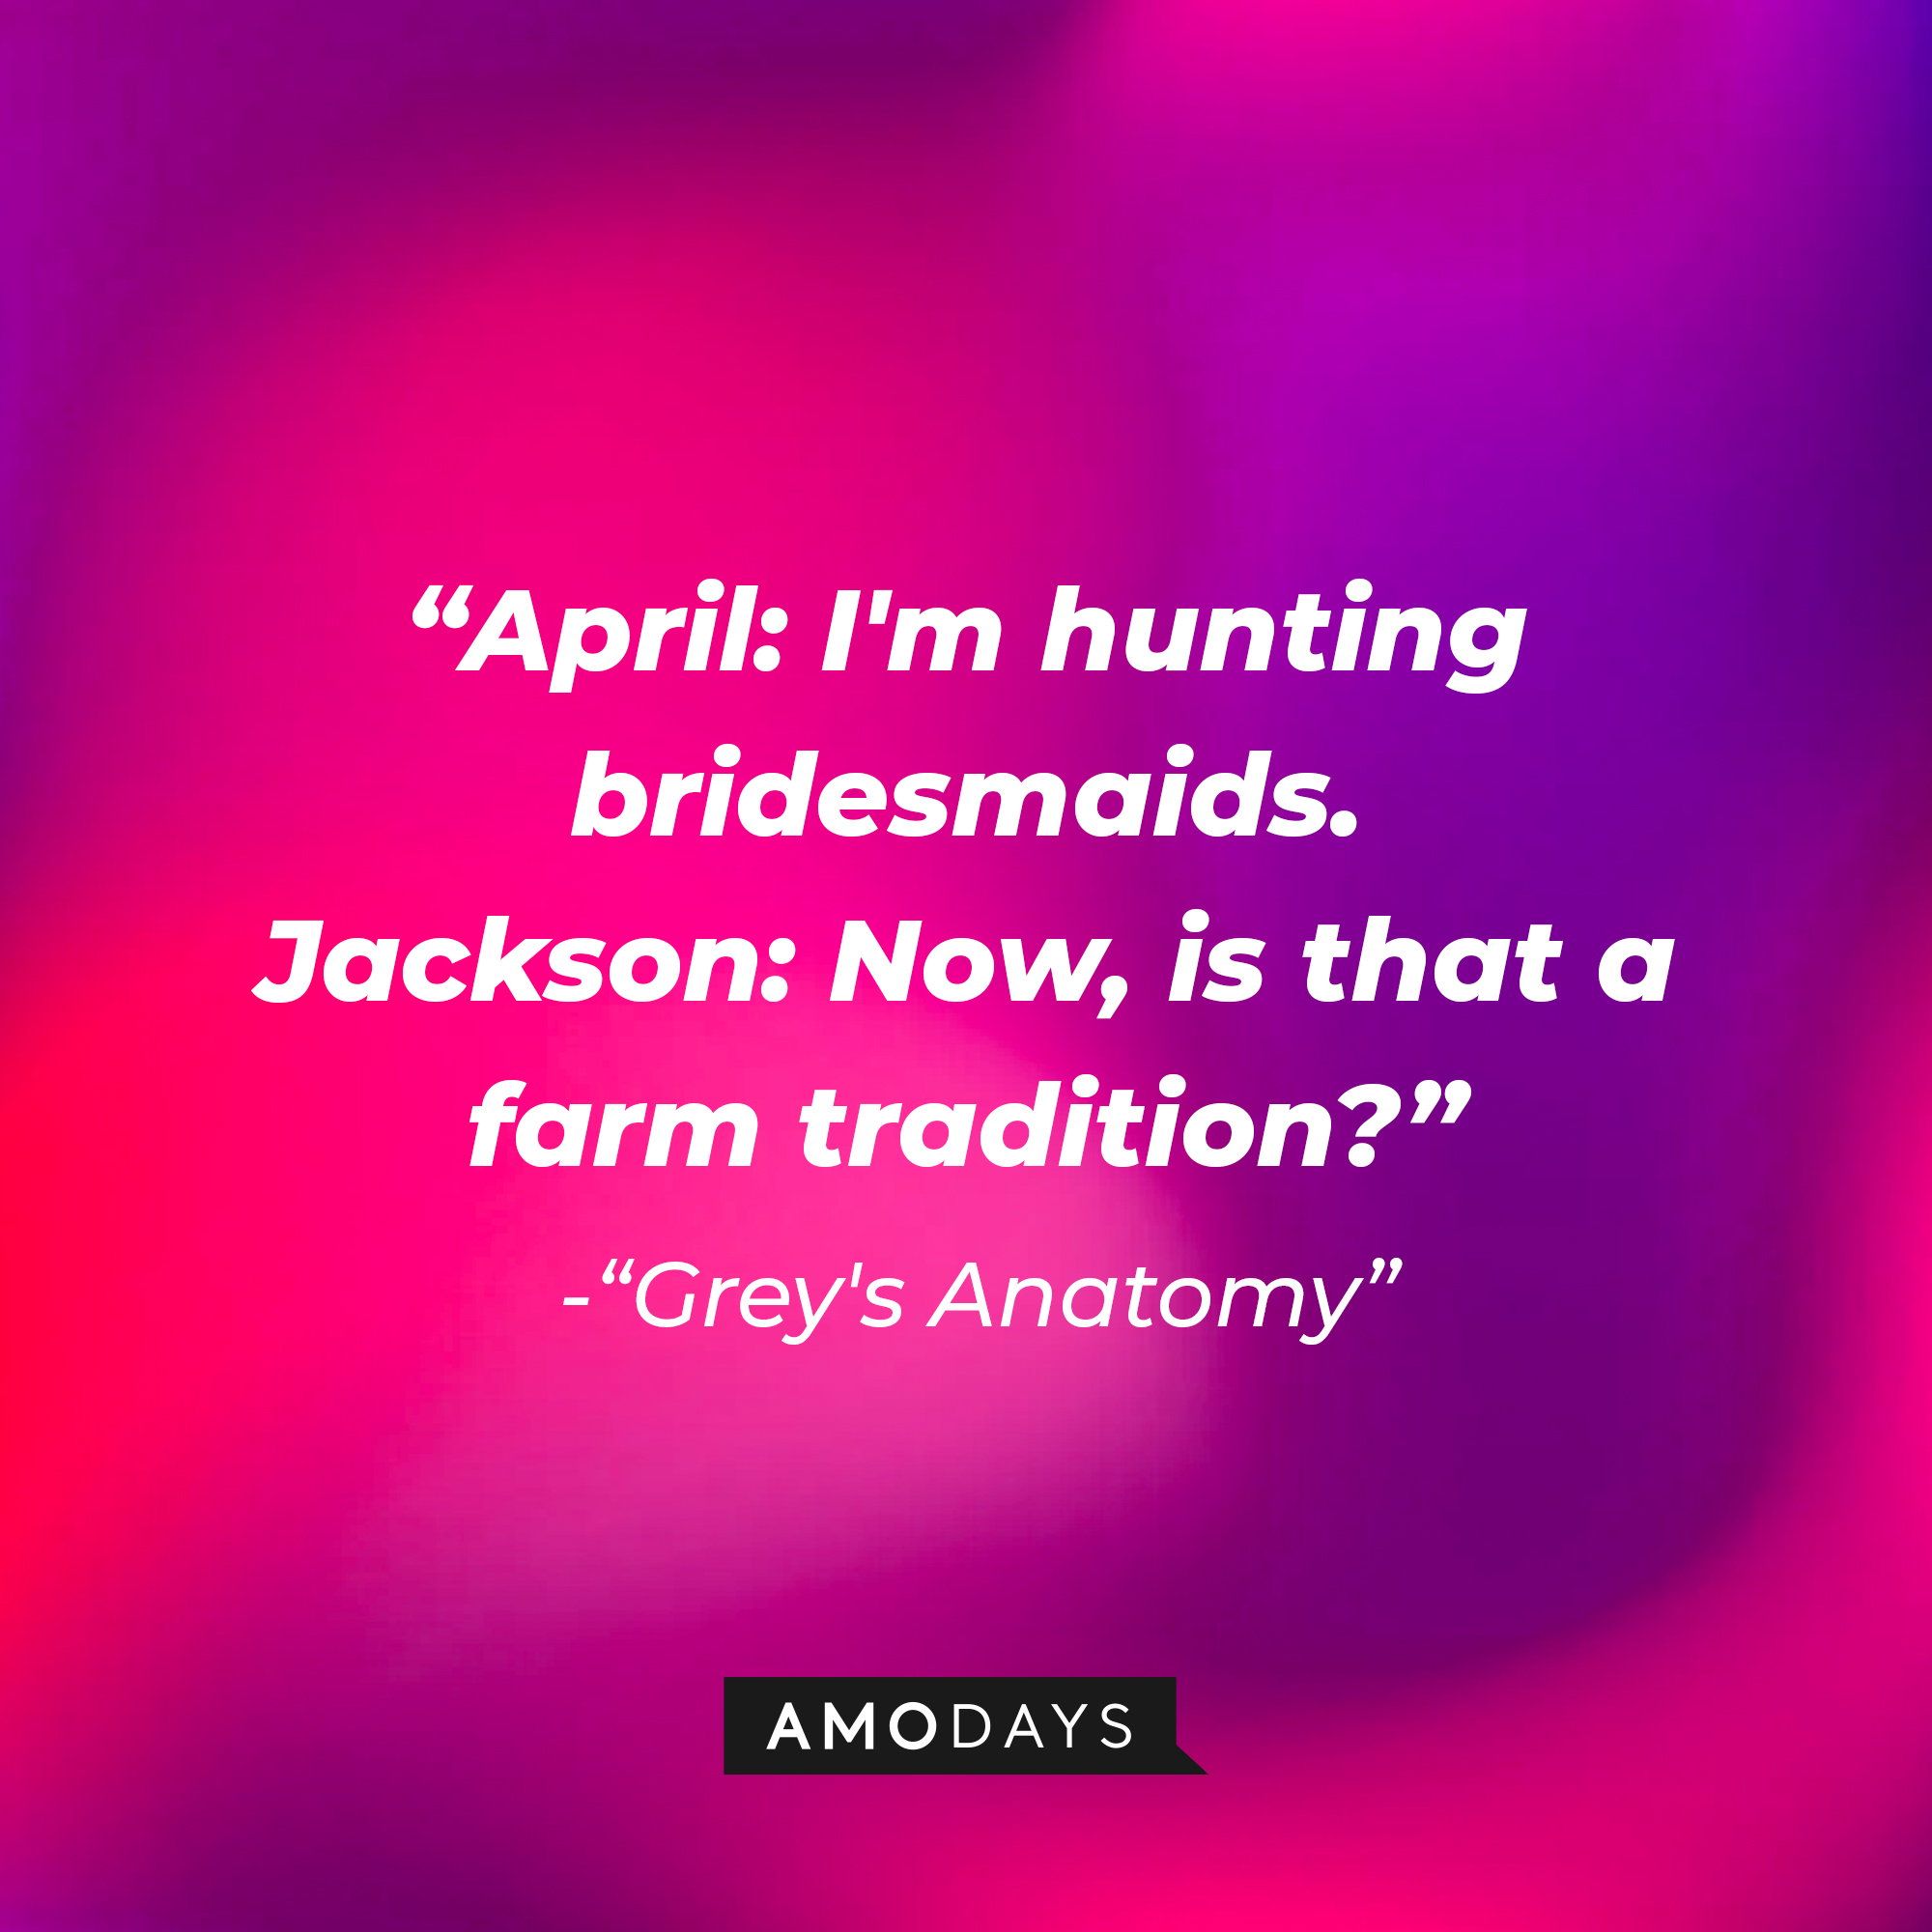 A dialogue from "Grey's Anatomy" series: "April: I'm hunting bridesmaids. Jackson: Now, is that a farm tradition?" | Source: AmoDays